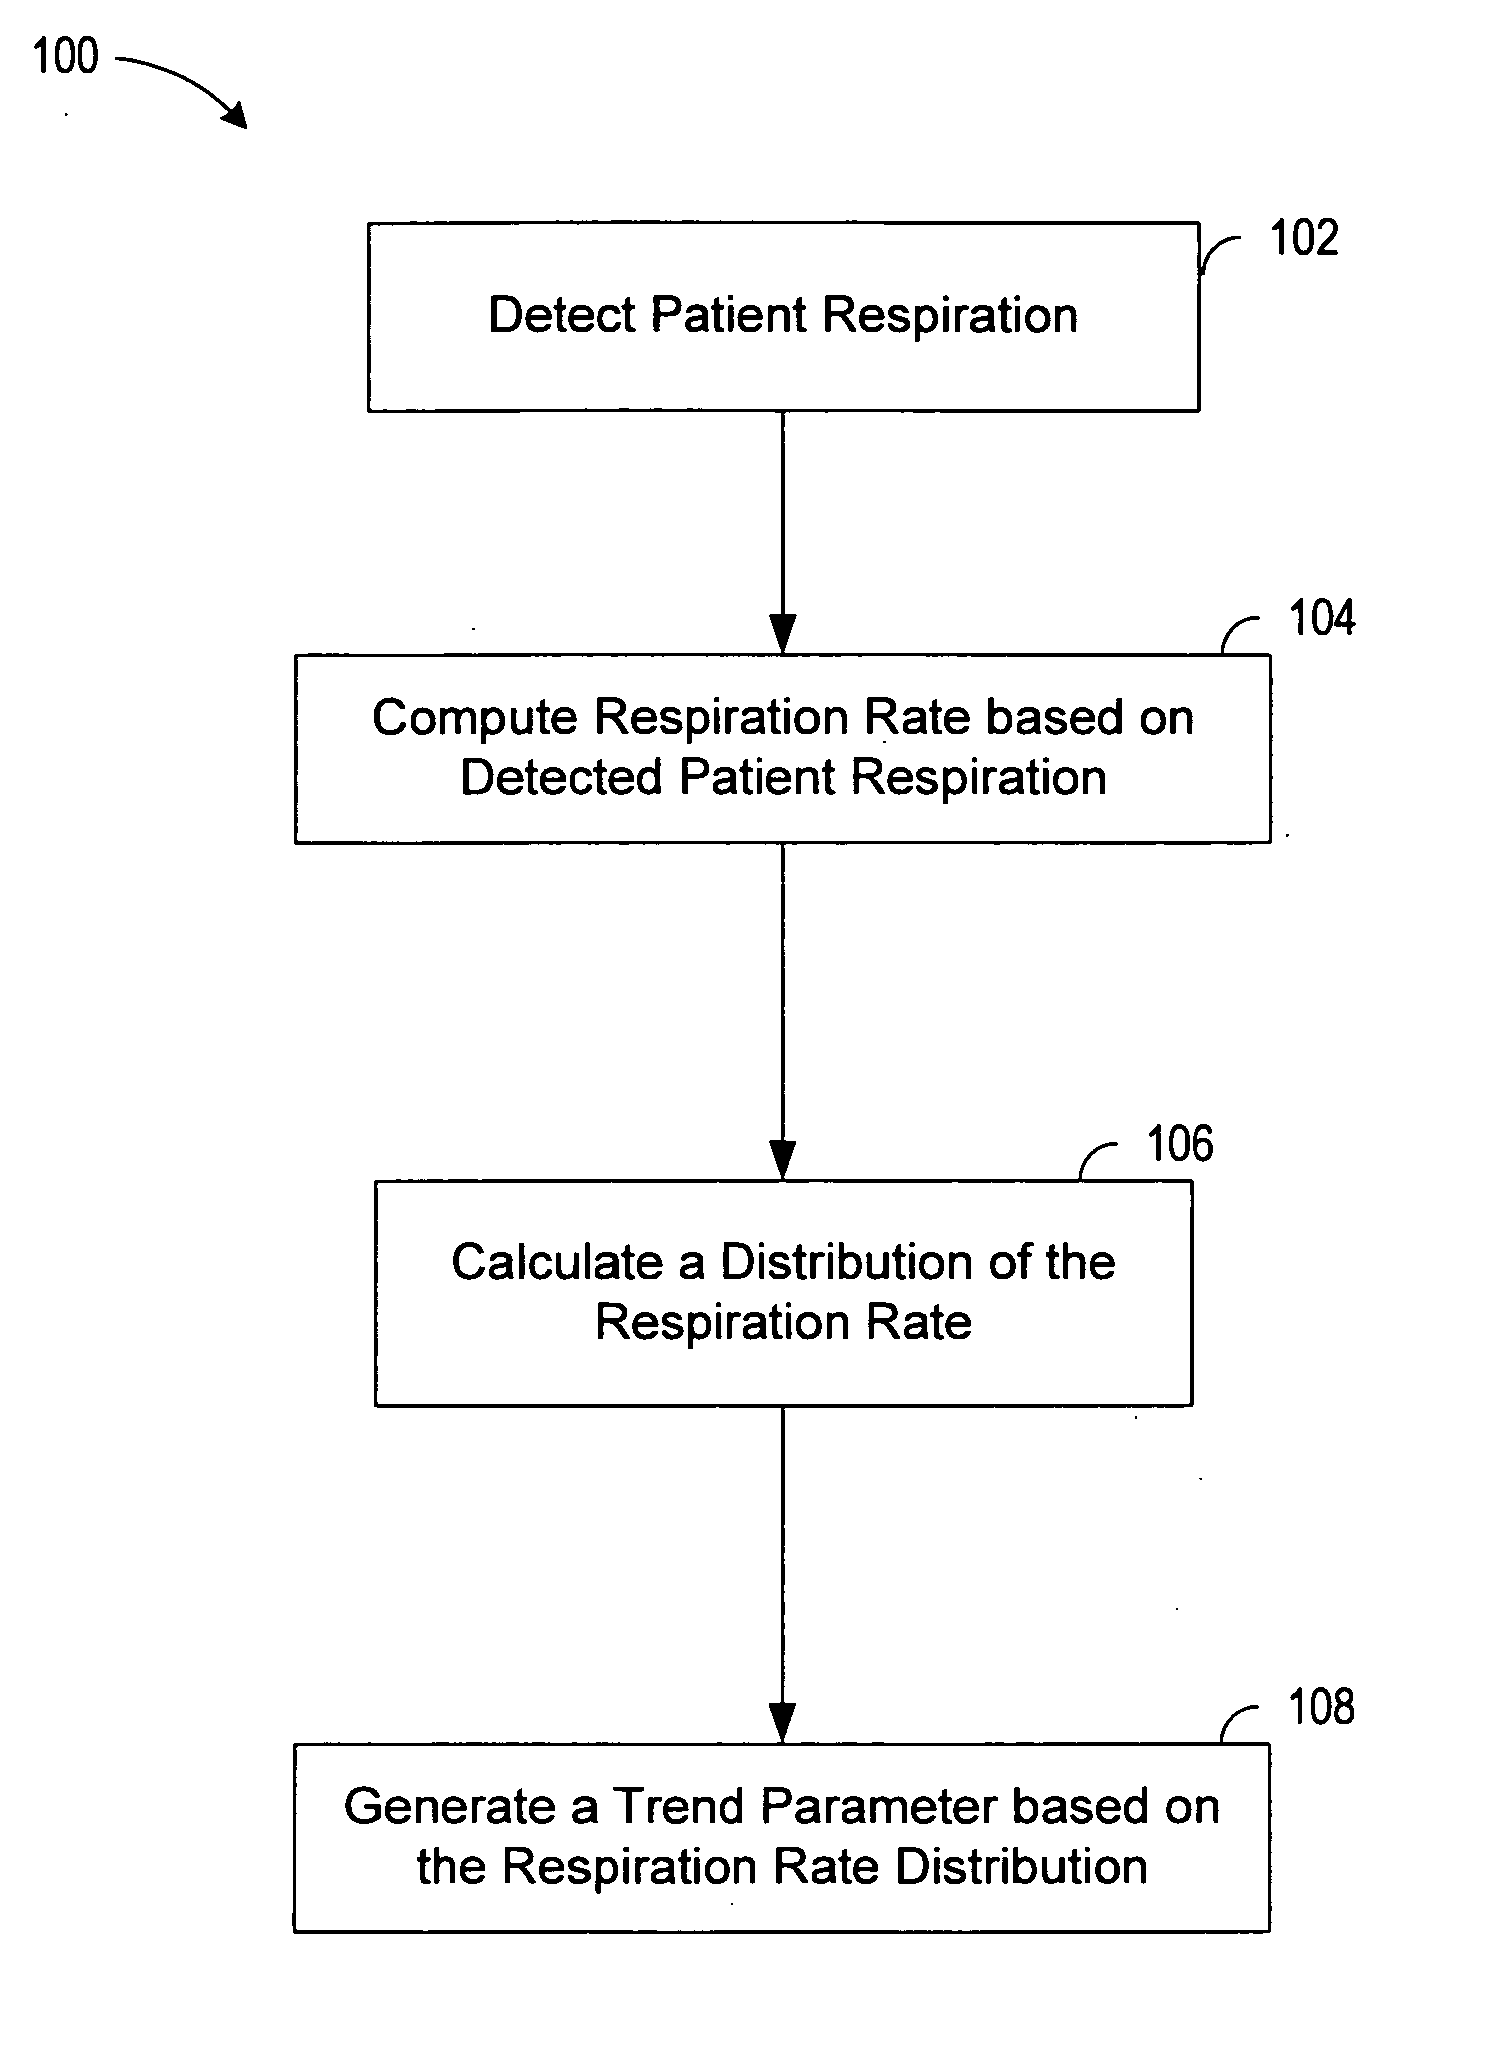 System and method for generating a trend parameter based on respiration rate distribution